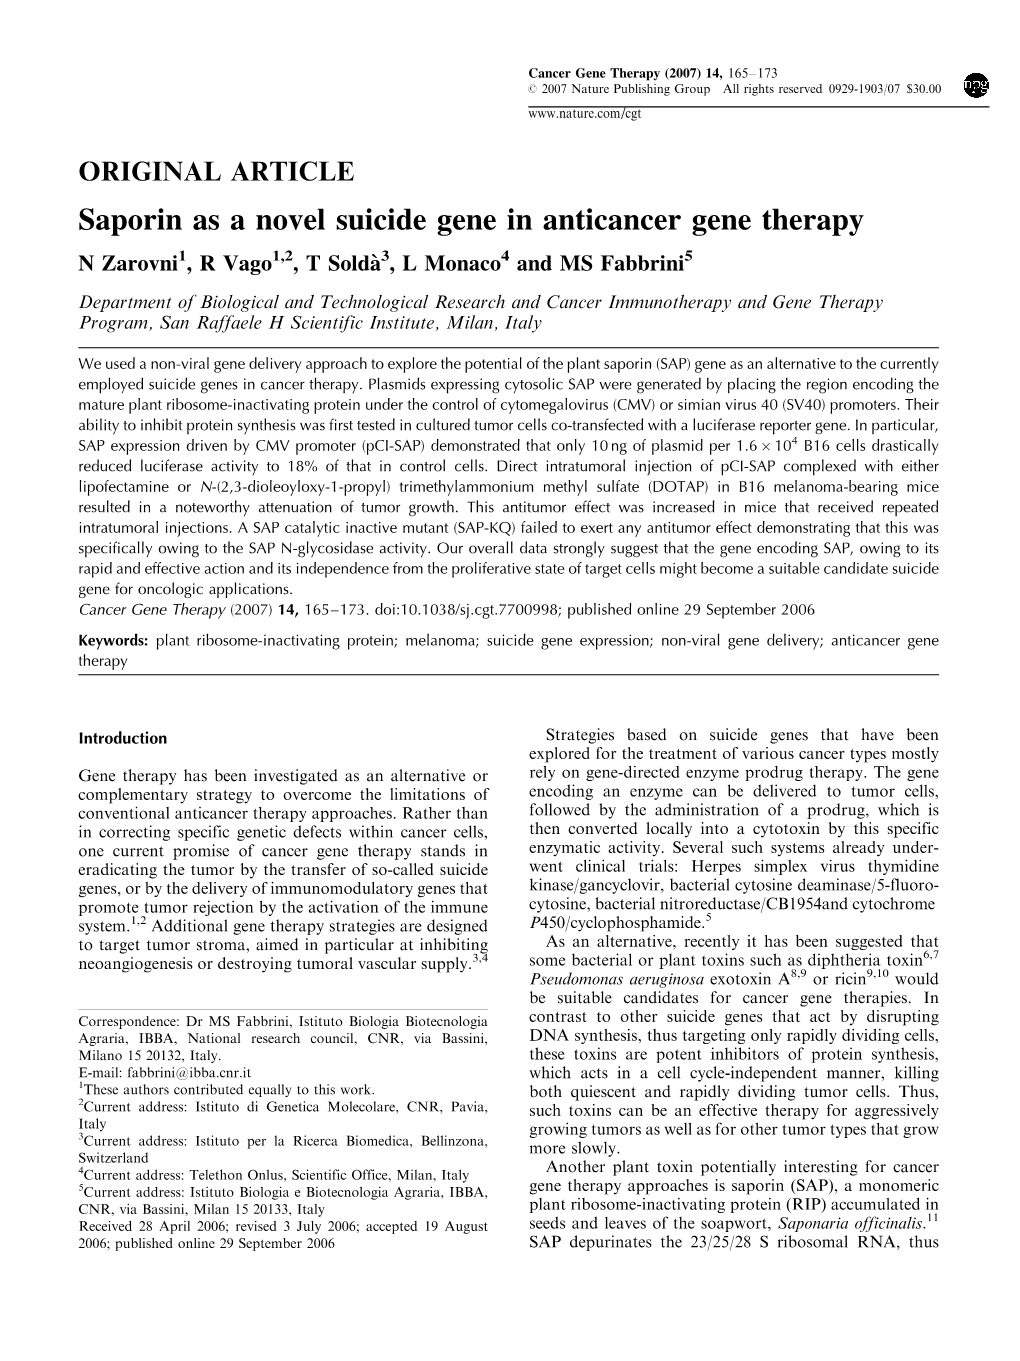 Saporin As a Novel Suicide Gene in Anticancer Gene Therapy